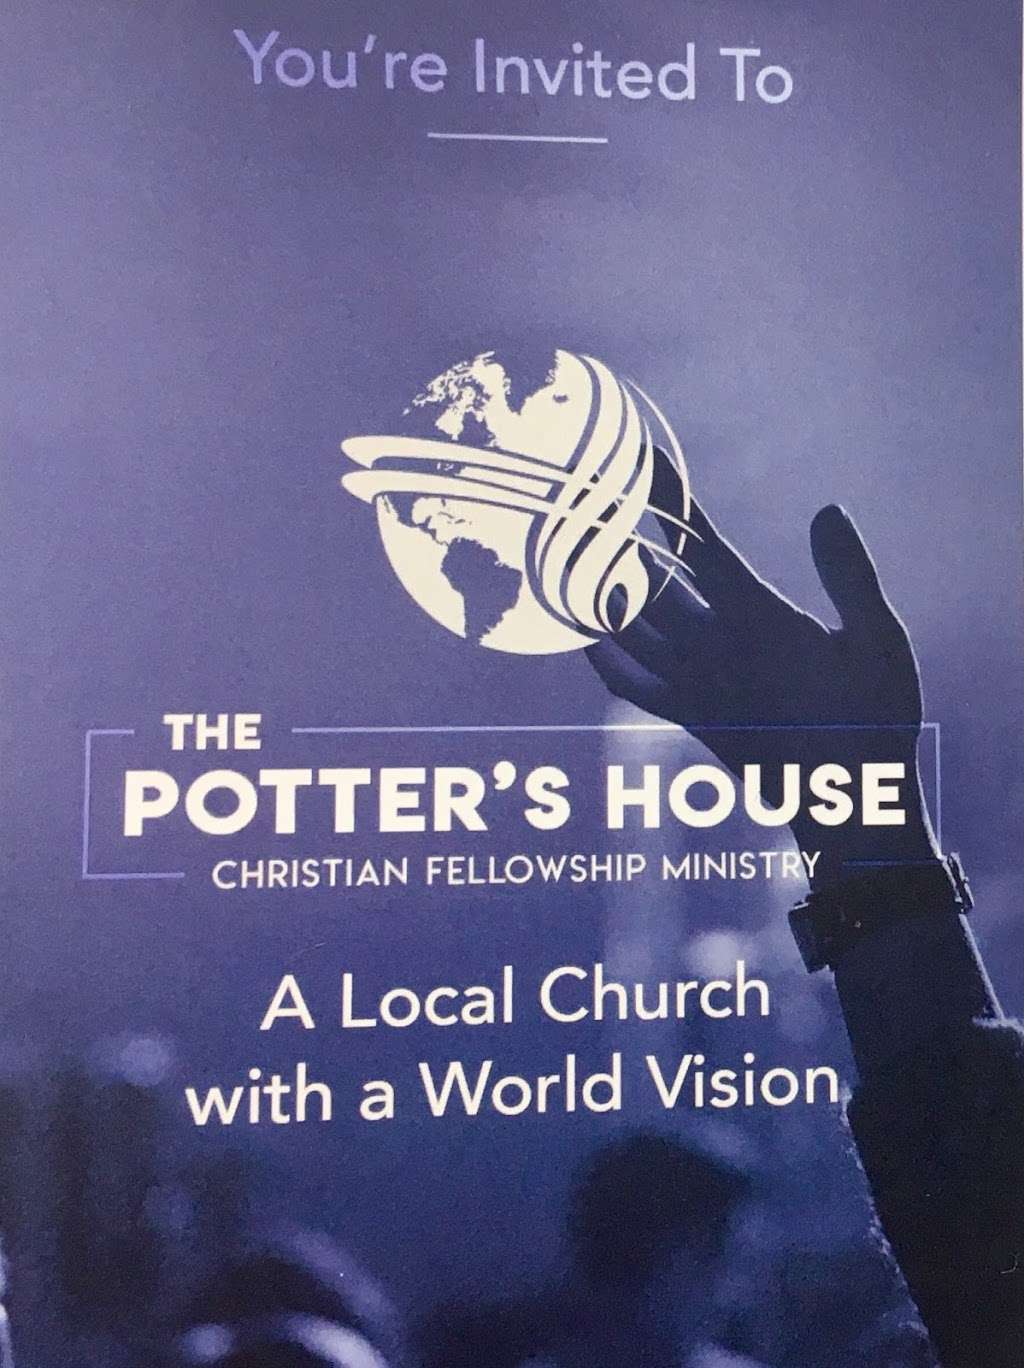 The Potters House cfm | 23 Mays Landing Road, Somers Point, NJ 08244 | Phone: (702) 406-7245